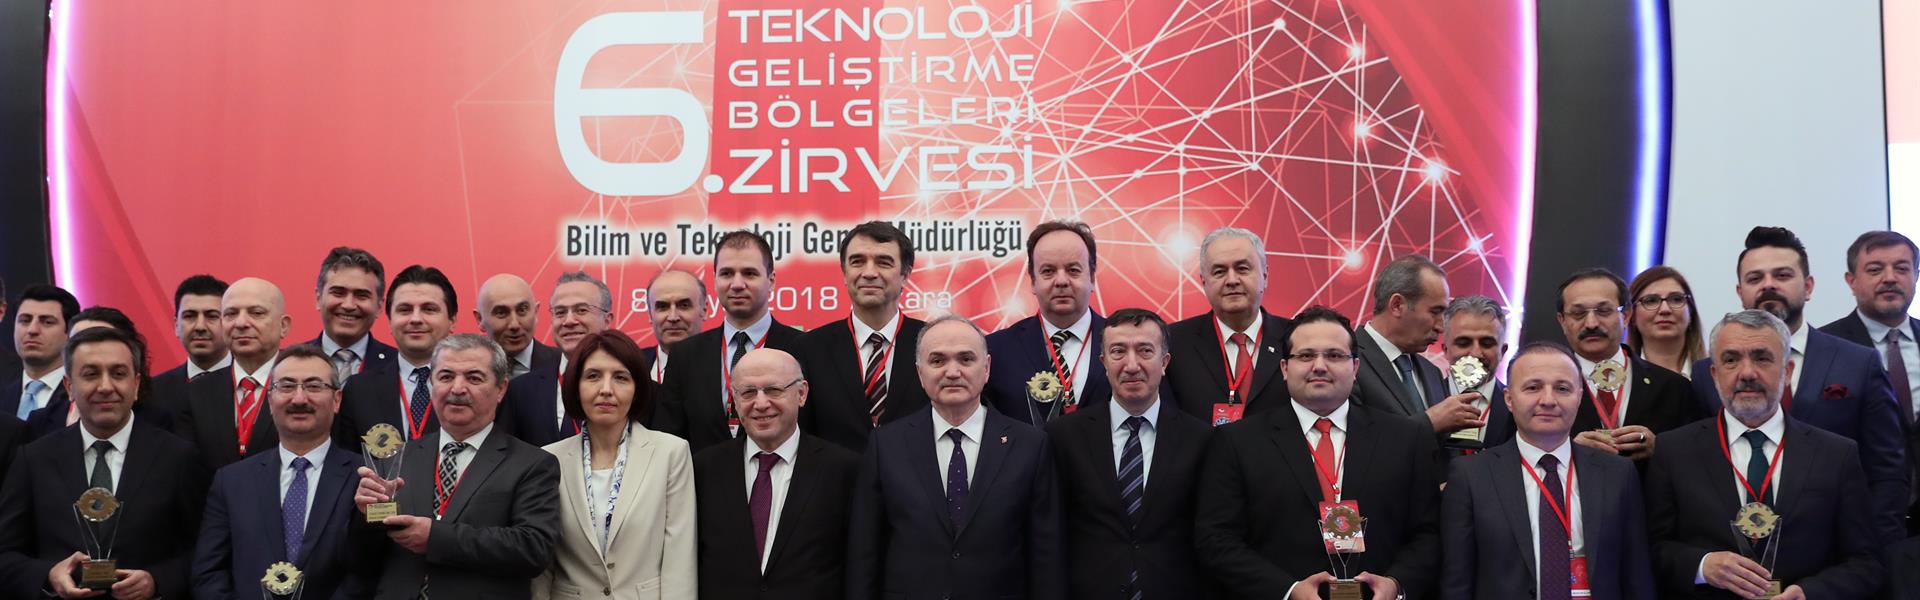 Istanbul-University-Teknokent-came-in-second-place-among-"Emerging-Technology-Development-Zones"